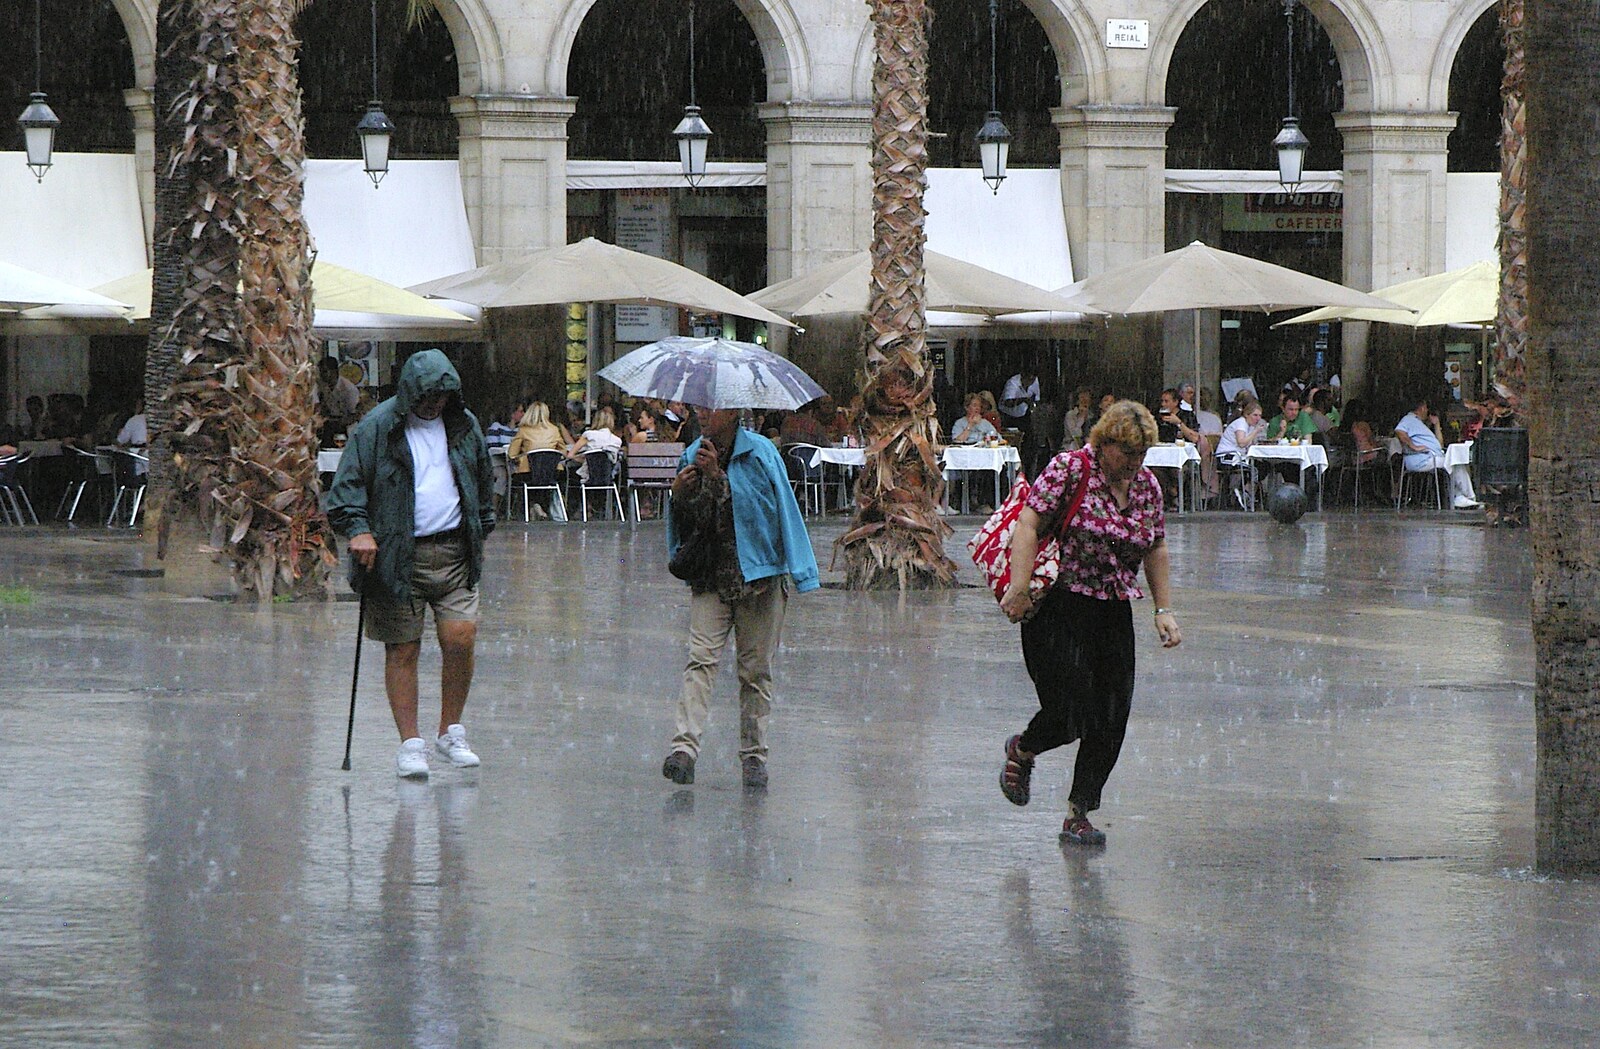 People run from the rain from Two Days in Barcelona, Catalunya, Spain - 22nd September 2006